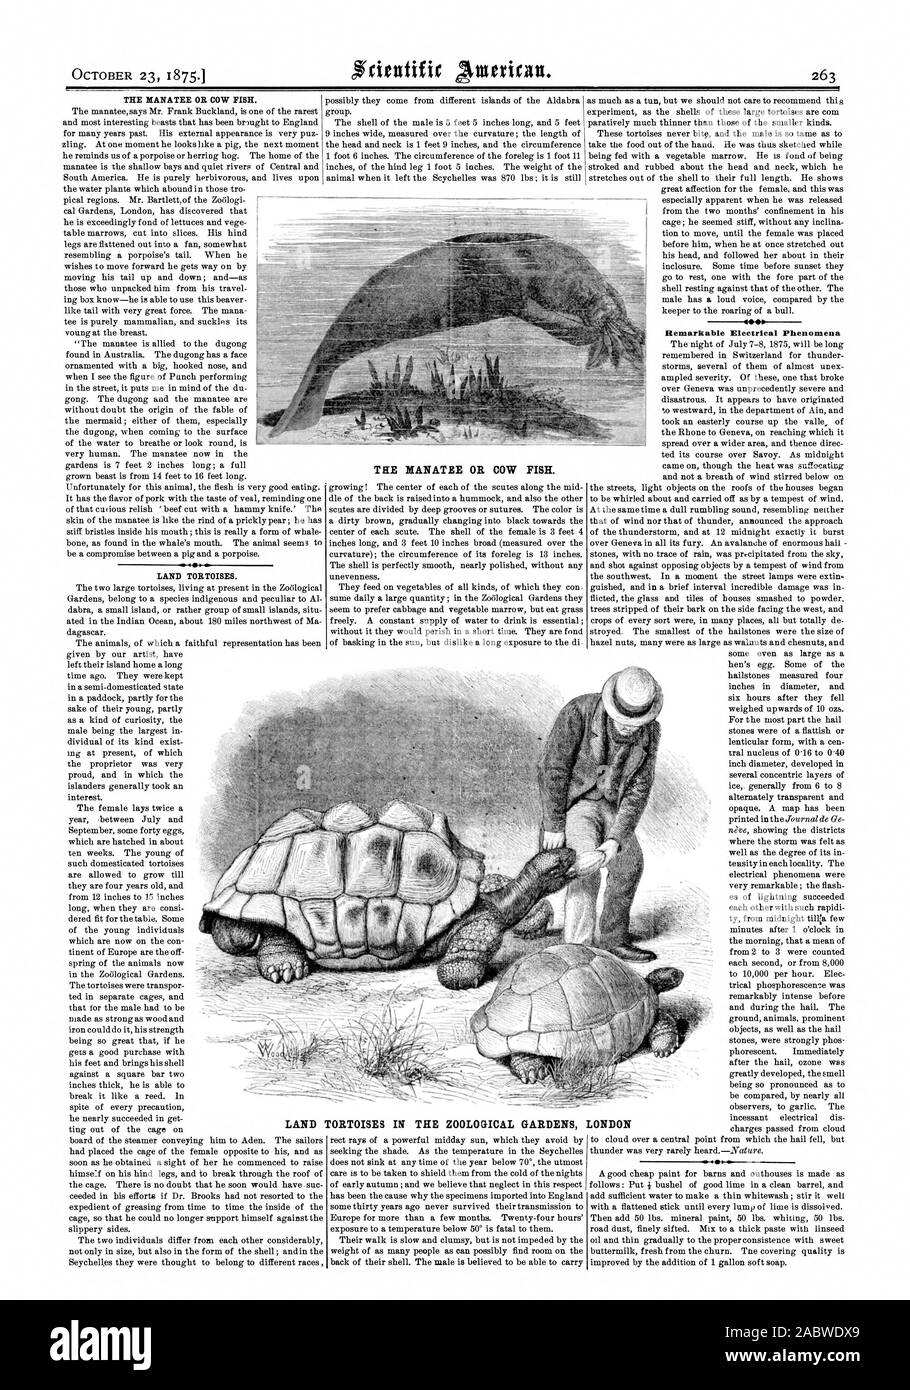 THE MANATEE OR COW FISH. LAND TORTOISES. THE MANATEE OR COW FISH. 4410. Remarkable Electrical Phenomena vi  LAND TORTOISES IN THE ZOOLOGICAL GARDENS LONDON, scientific american, 1875-10-23 Stock Photo